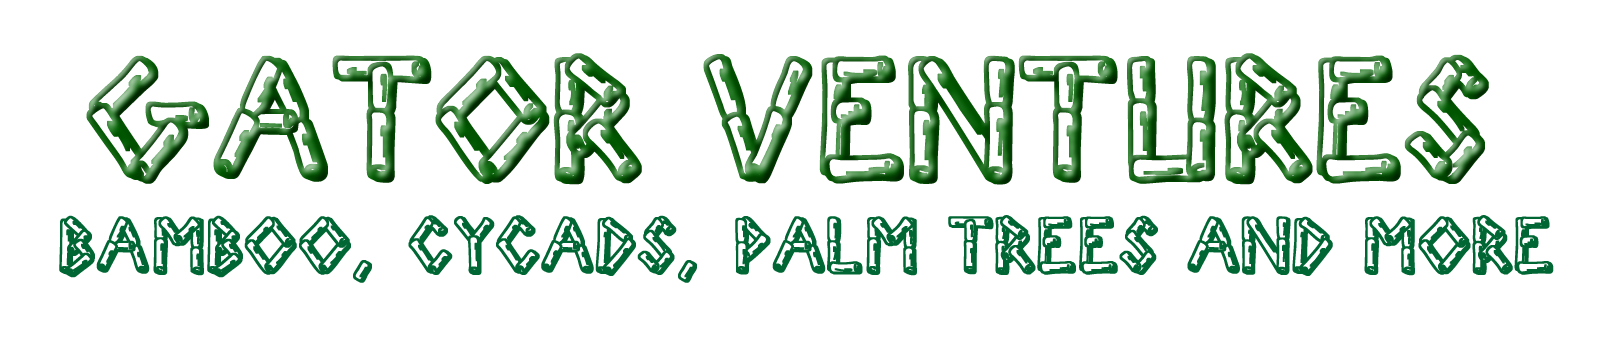 Gator Ventures Bamboo Cycads Palm Trees & More